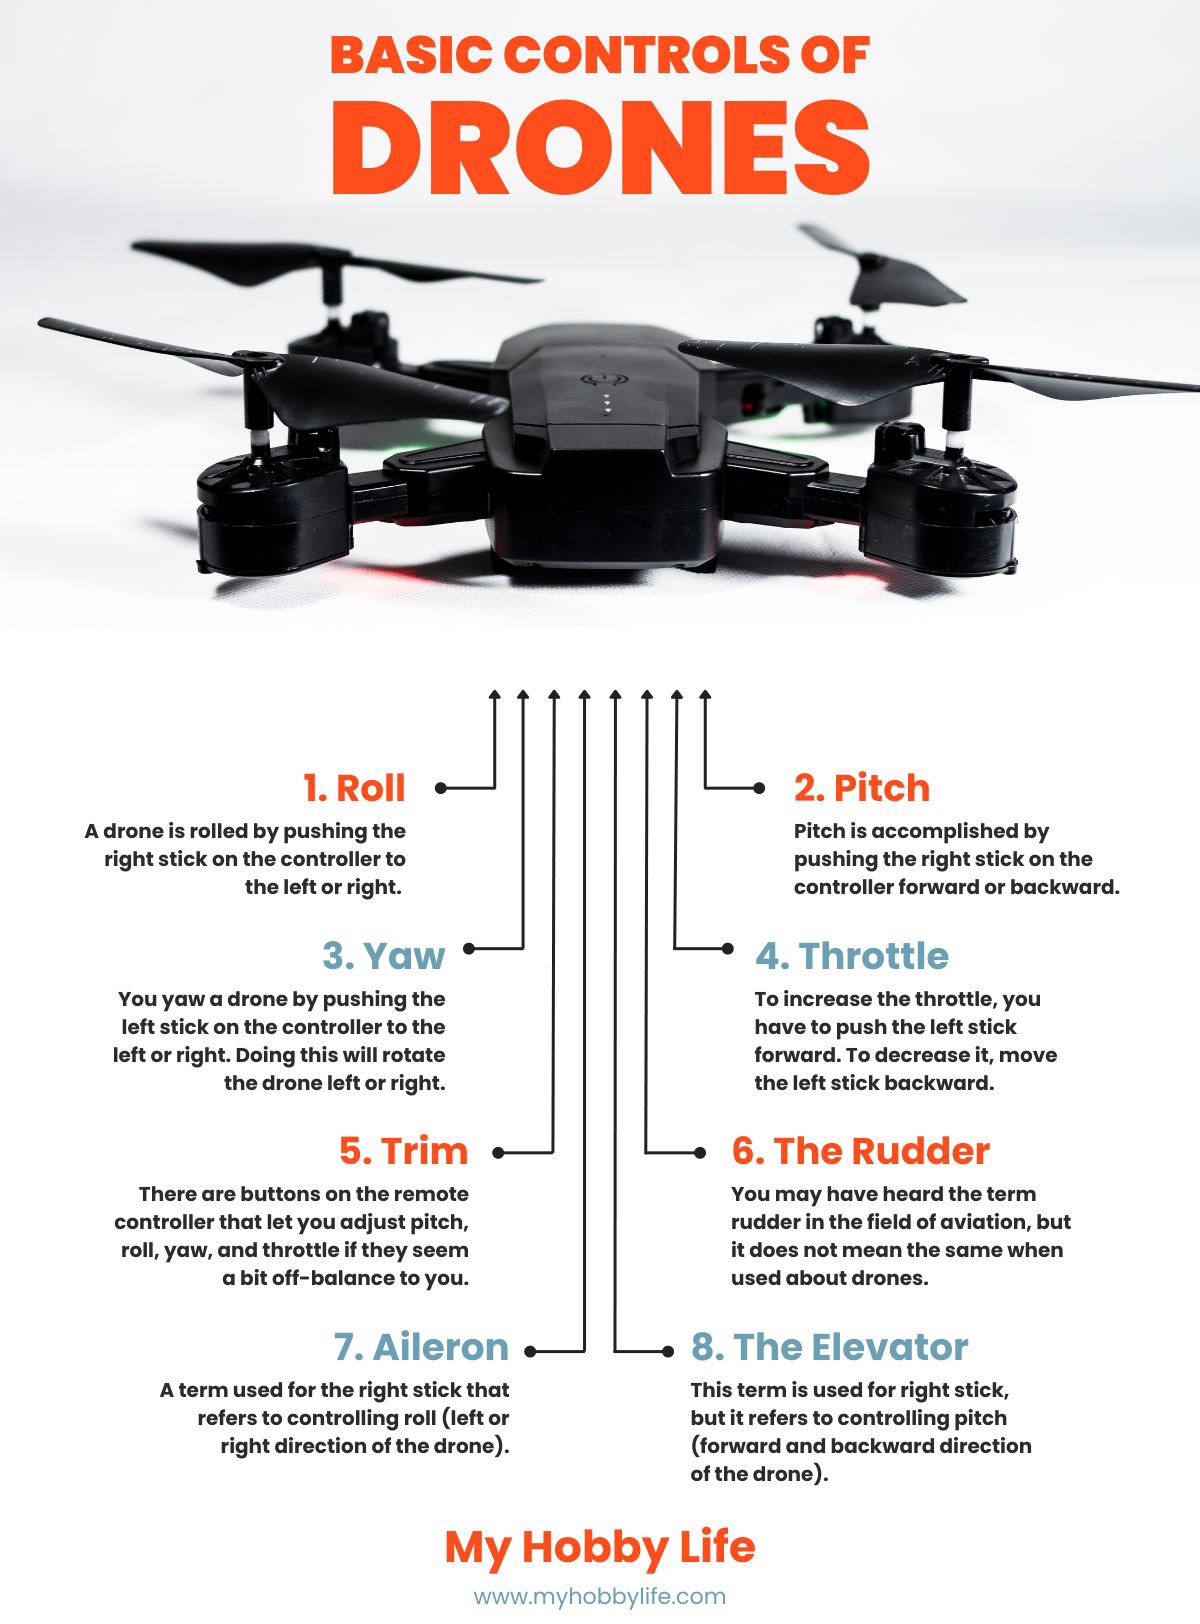 Basic Controls of Drones